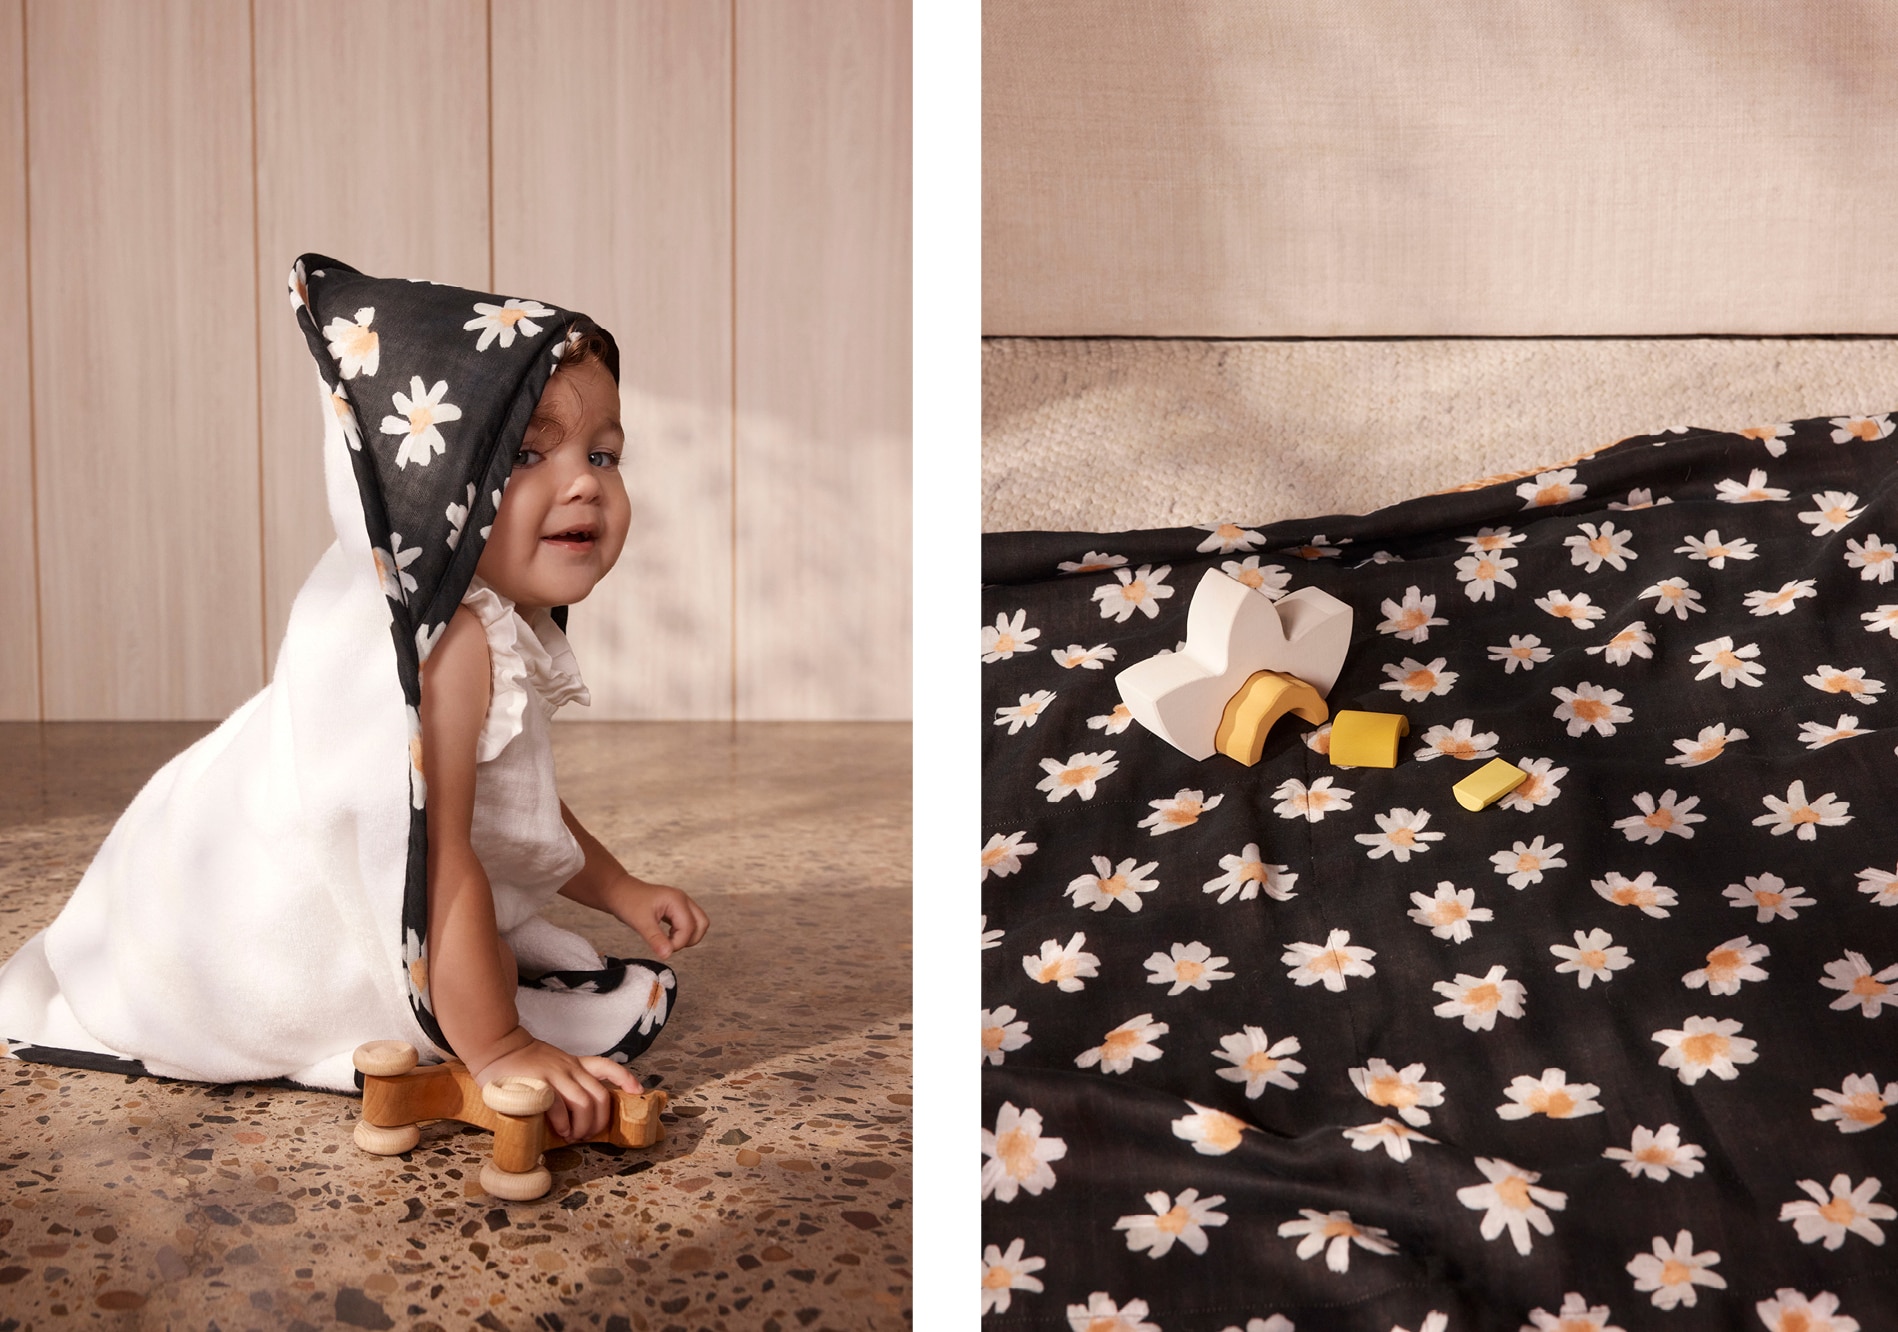 split image. on right, baby holding toy wooden horse, looking at camera, wearing a hooded towel with black and white daisy print. left, the same daisy pattern is on a blanket, spread across the floor. 